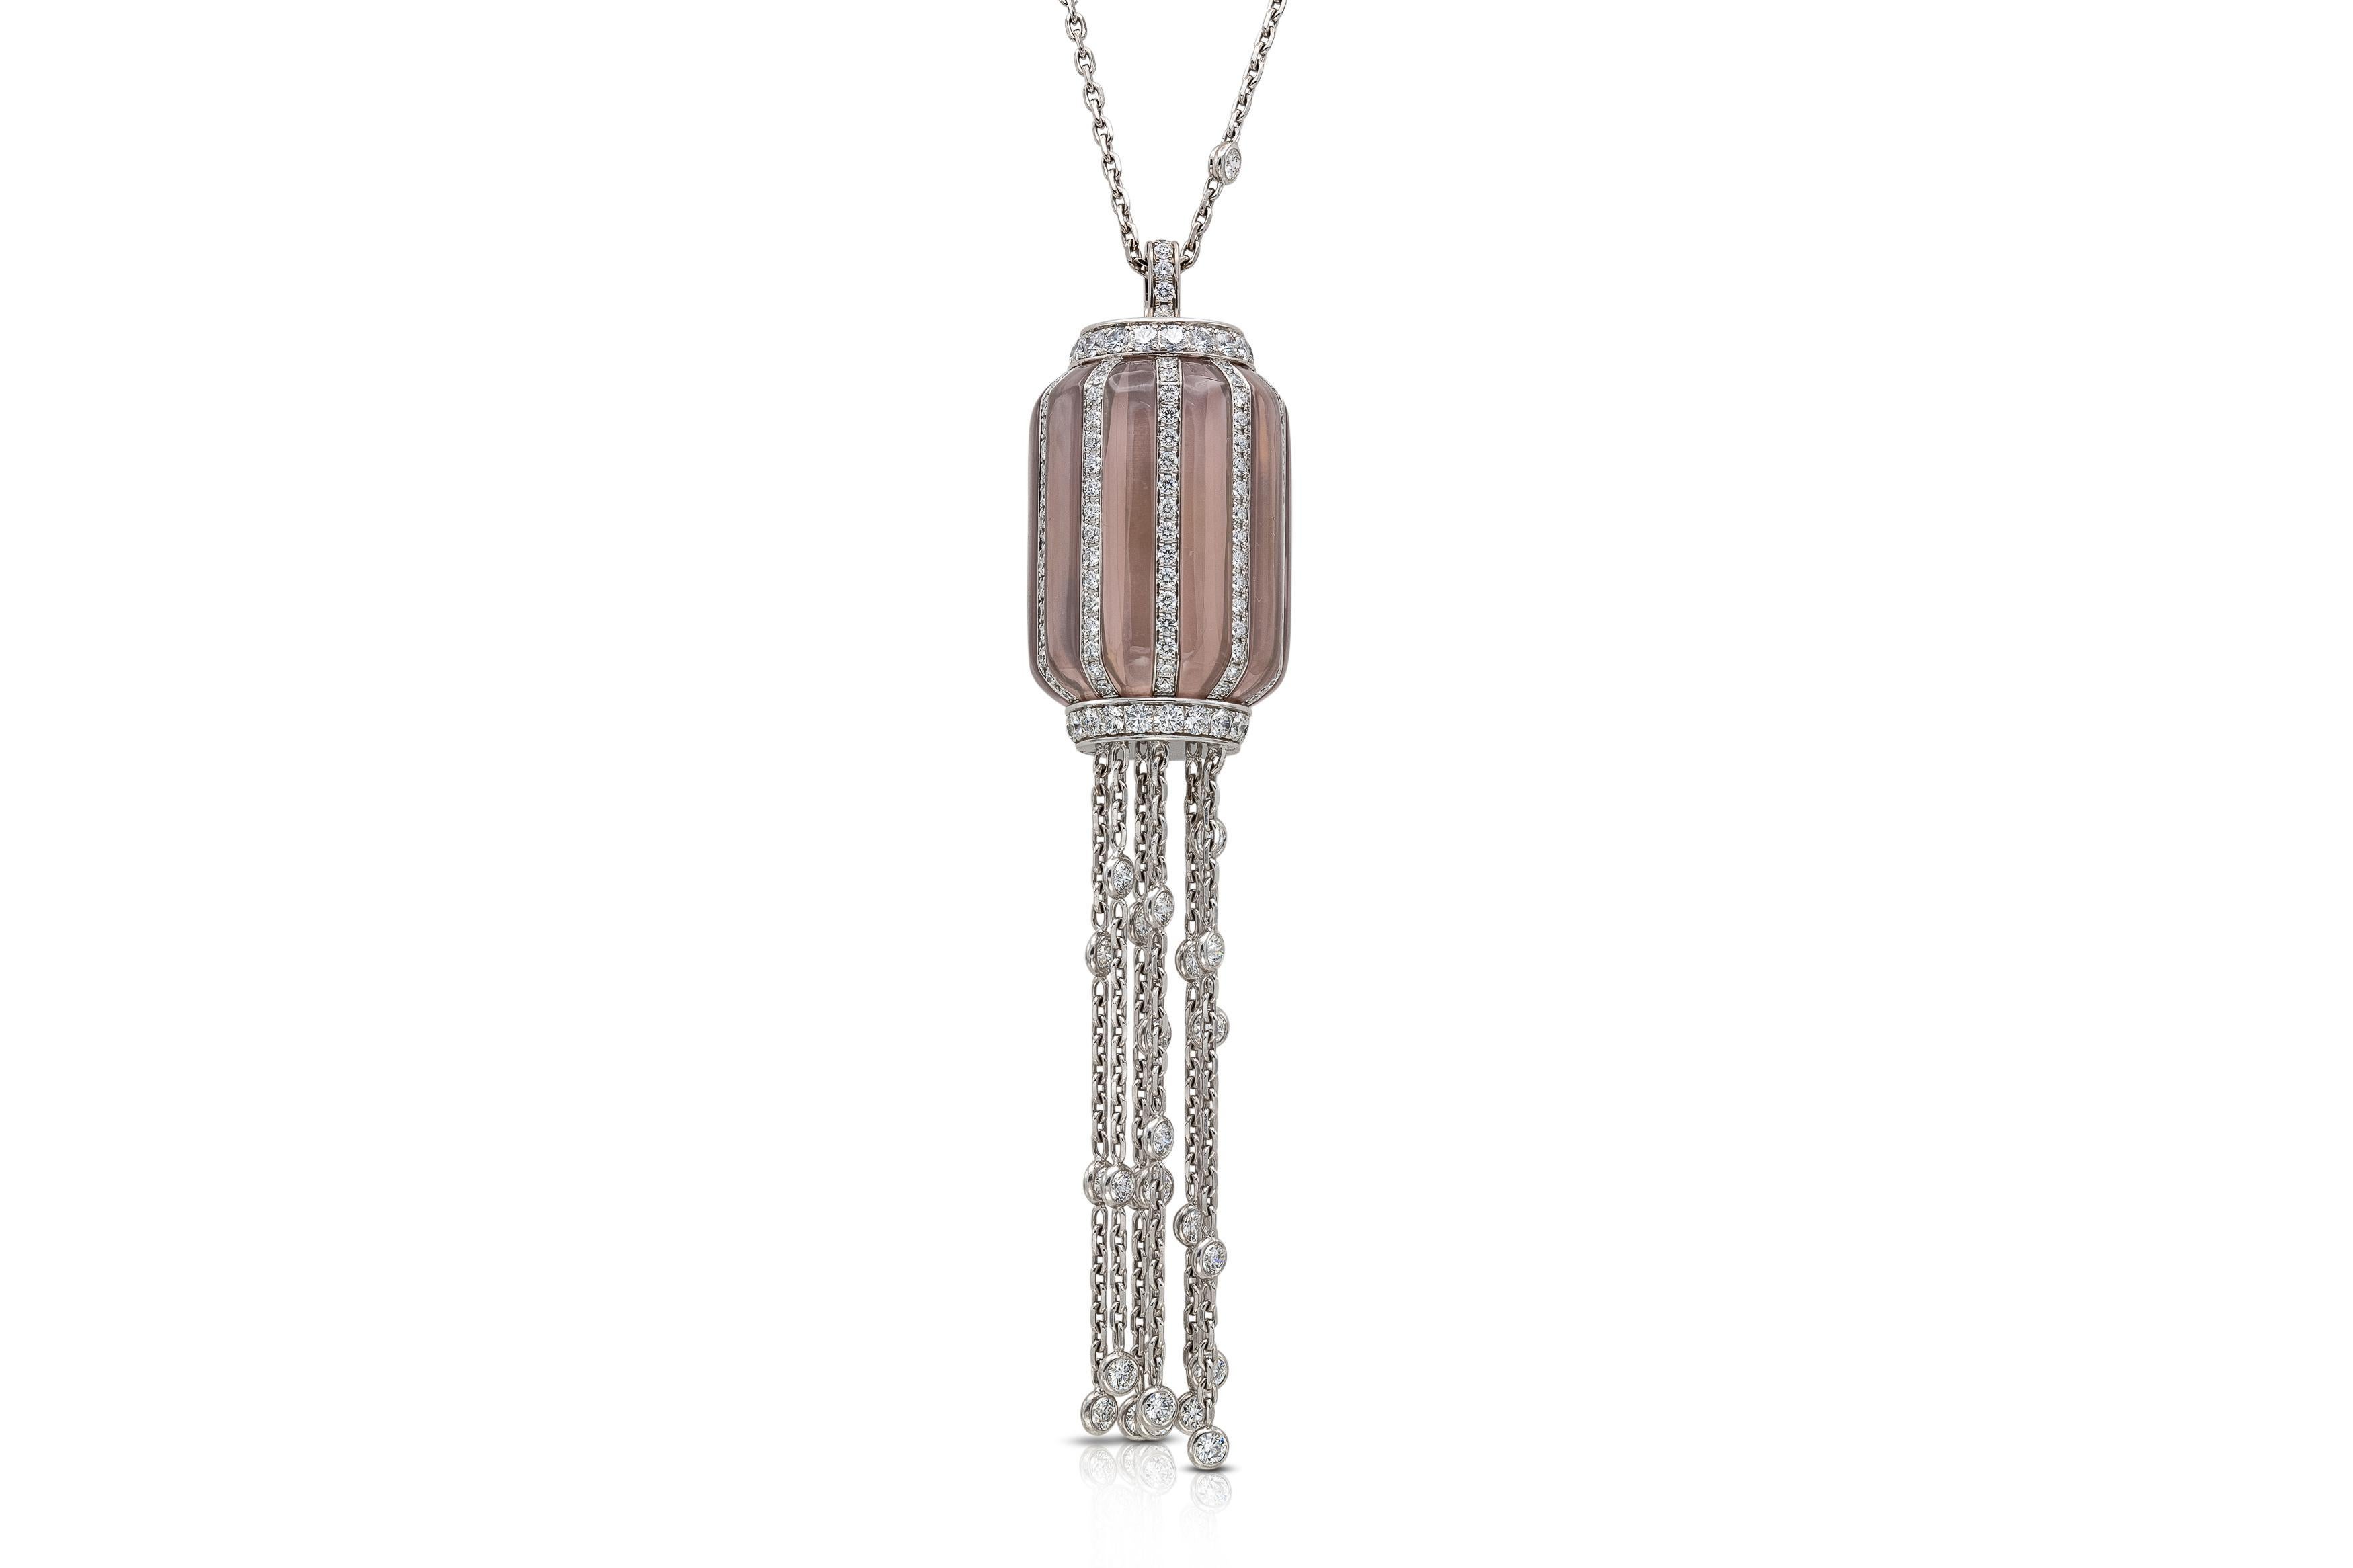 Finely crafted in platinum and 18k white gold with Rose Quartz and Round Brilliant cut Diamonds weighing approximately a total of 15.00 carats.
Signed by Piaget
Circa 1980s
The Diamonds by the yard chain is 29 inches long, the Rose Quartz pendant